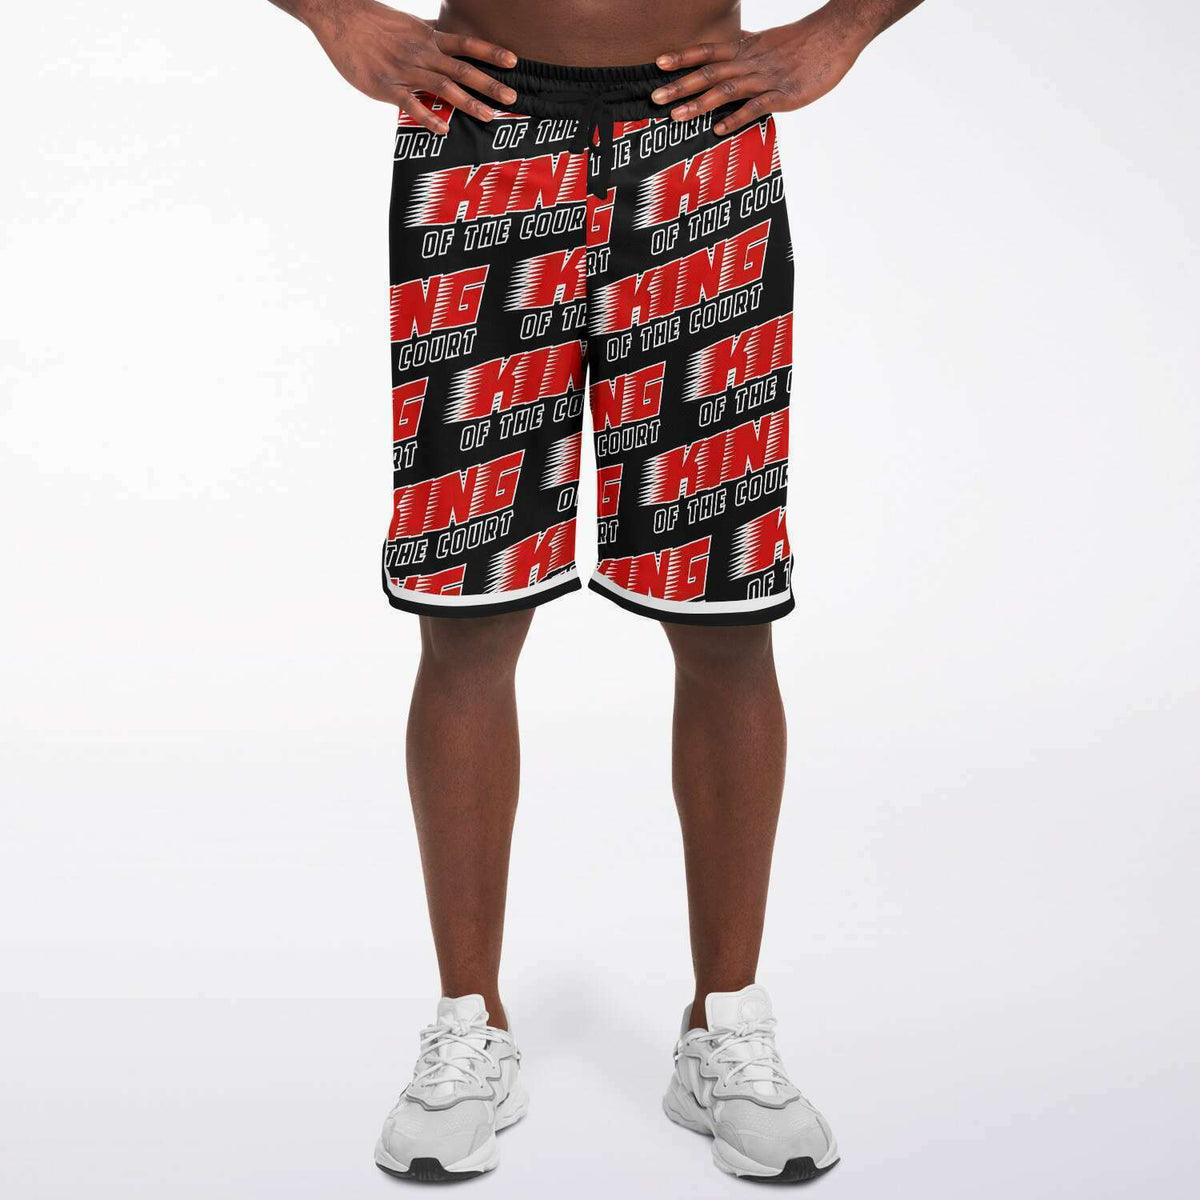 Hoop League King of the Court Game Shorts - Hoop League 